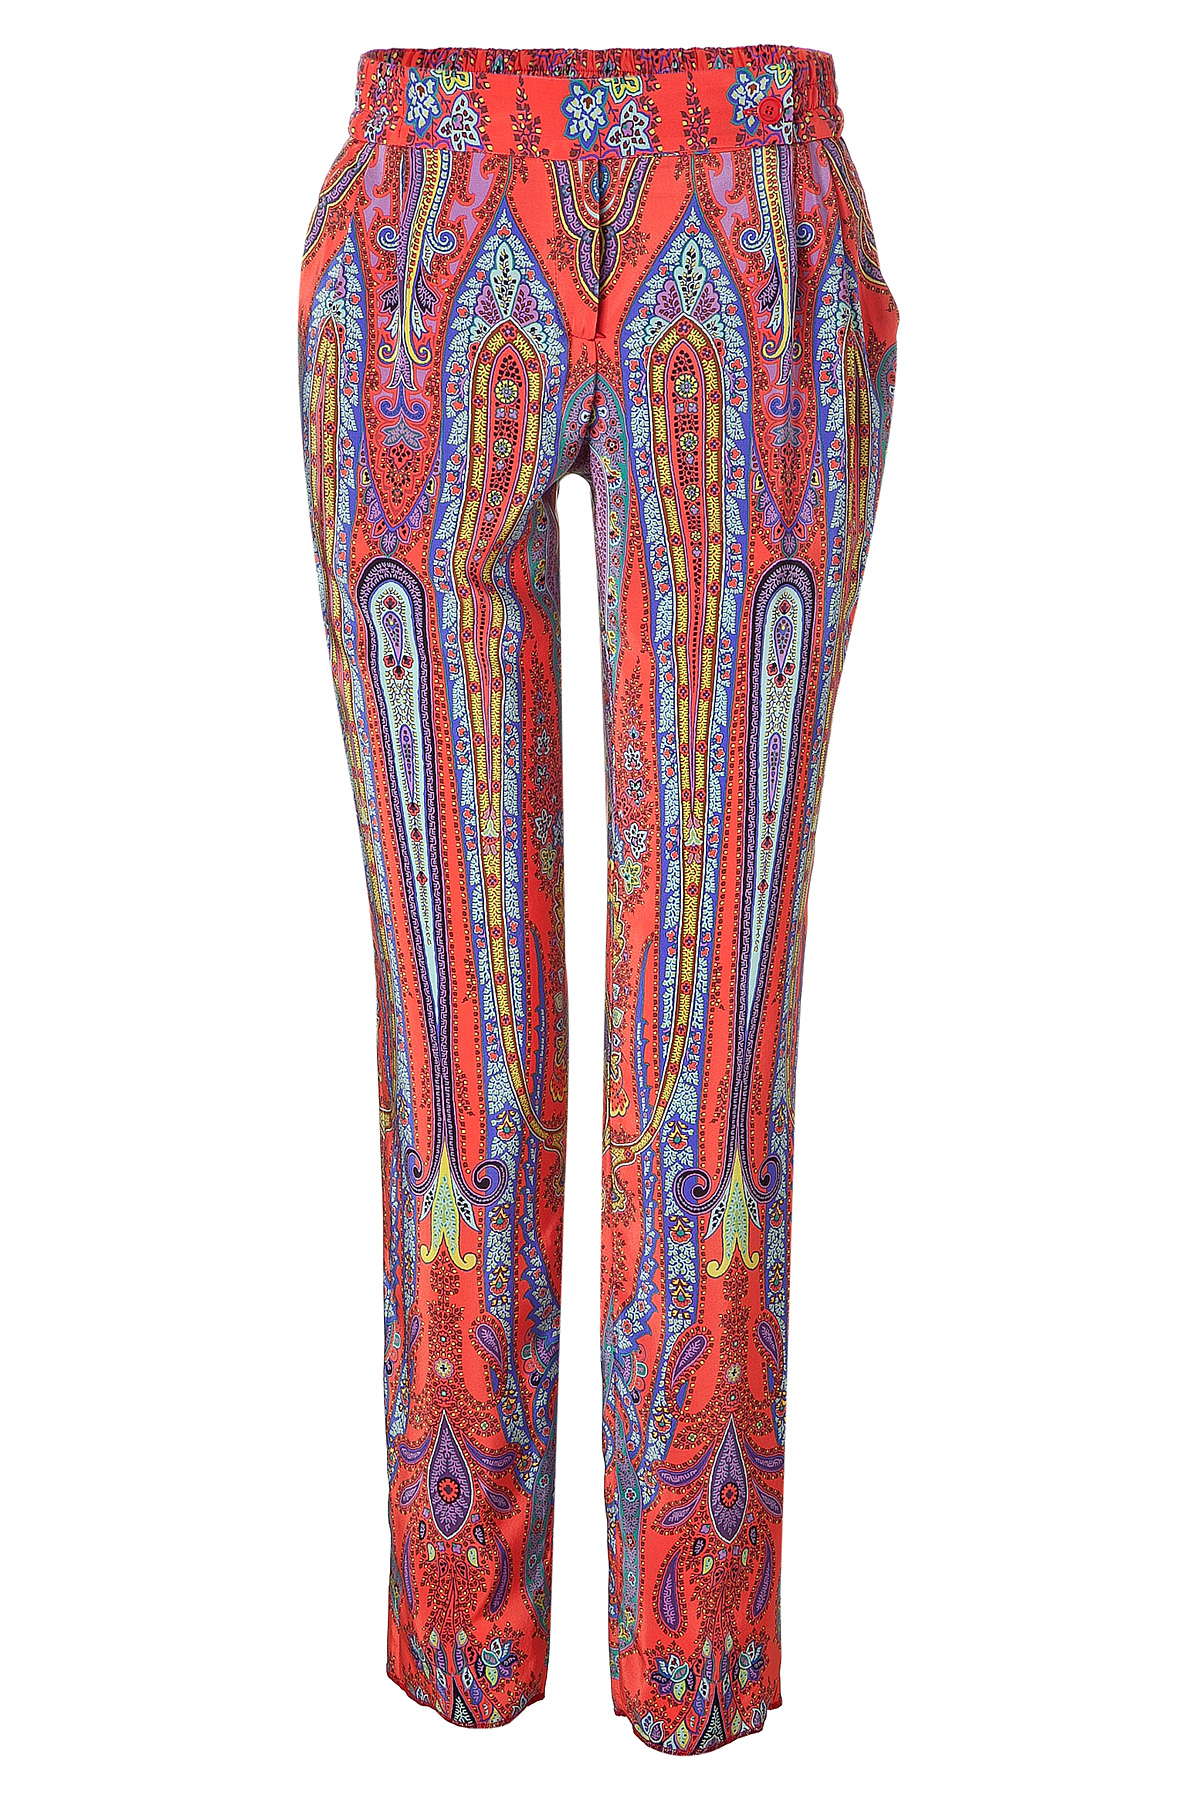 Lyst - Etro Coral and Blue Patterned Silk Pants in Pink